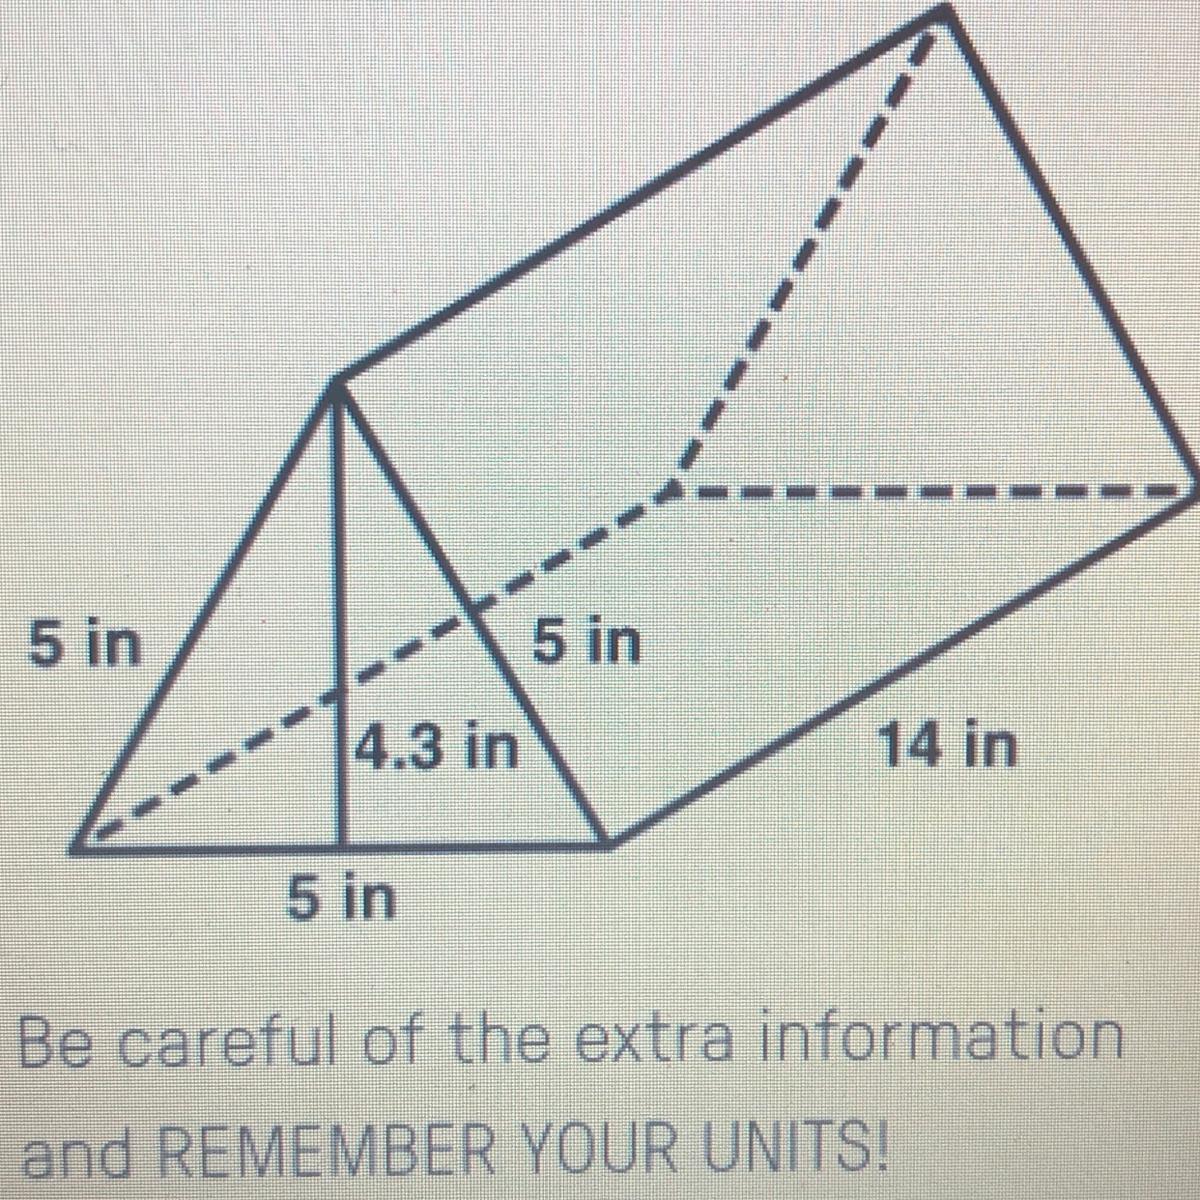 What Is The Volume Of This Triangular Prism?